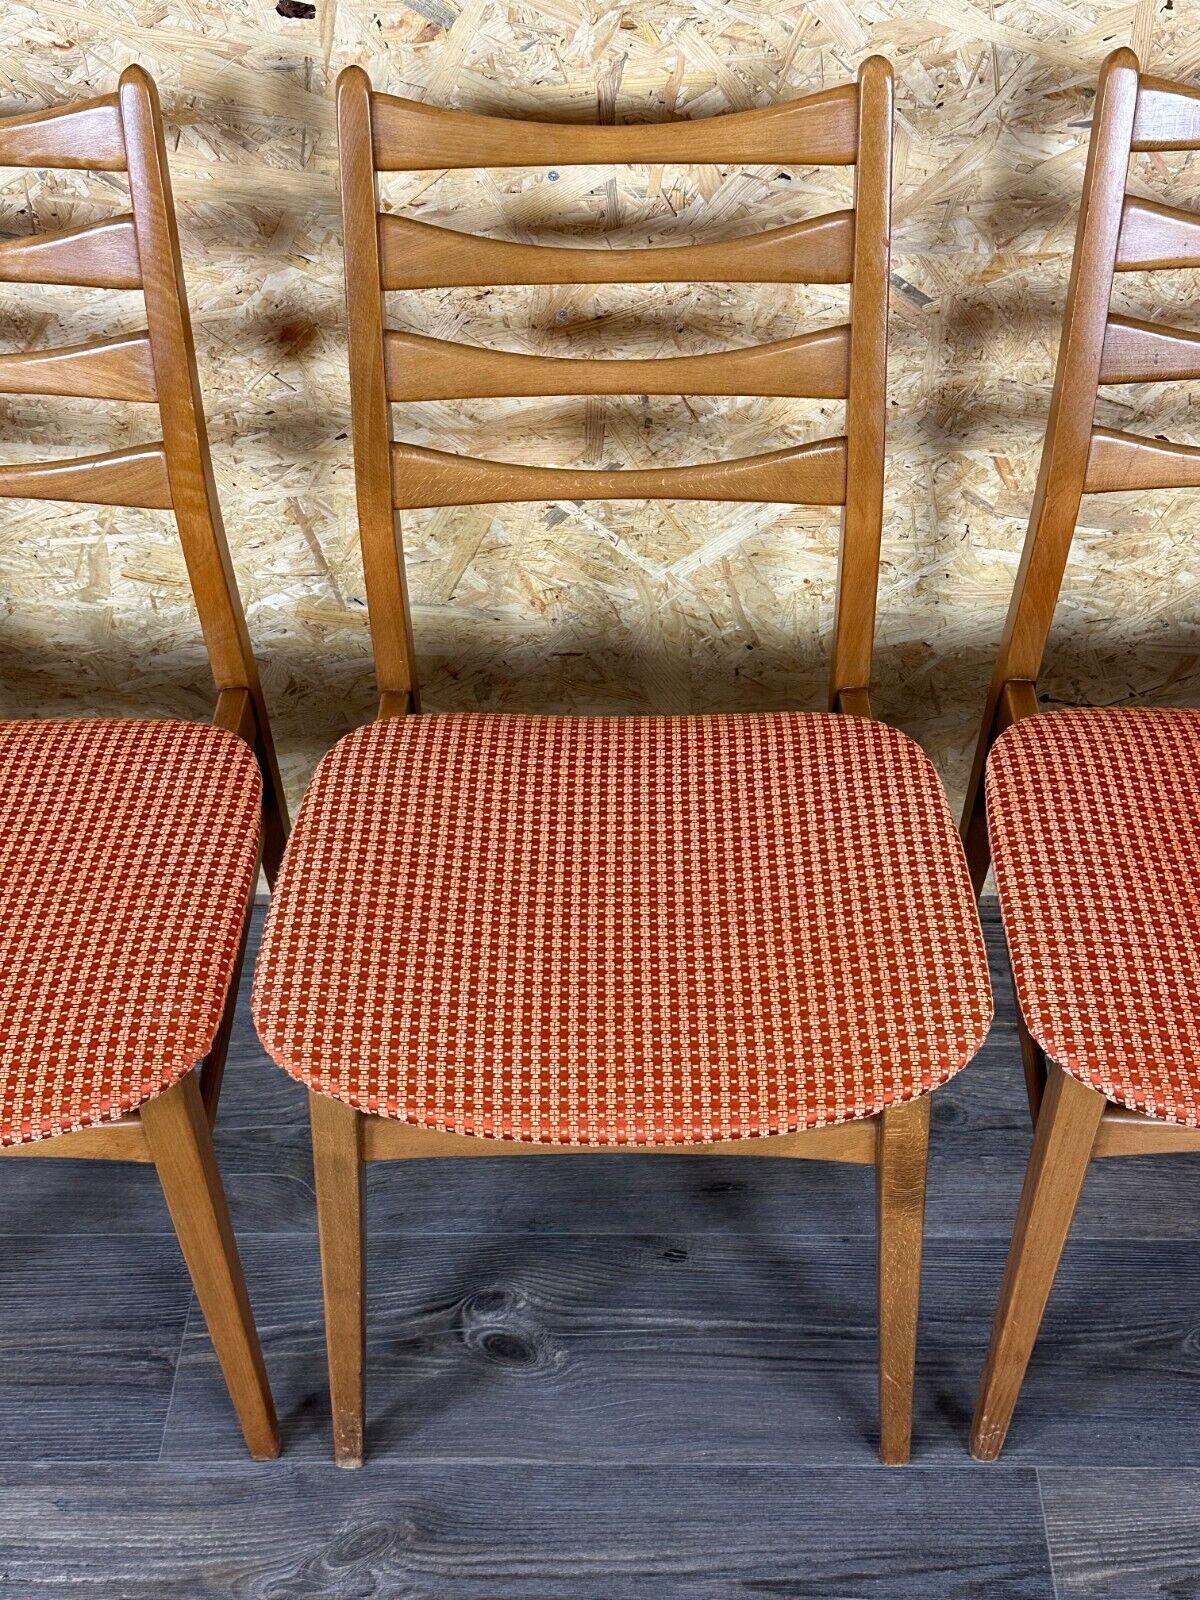 4x 60s 70s dining chair dining chair mid century Danish modern design For Sale 2